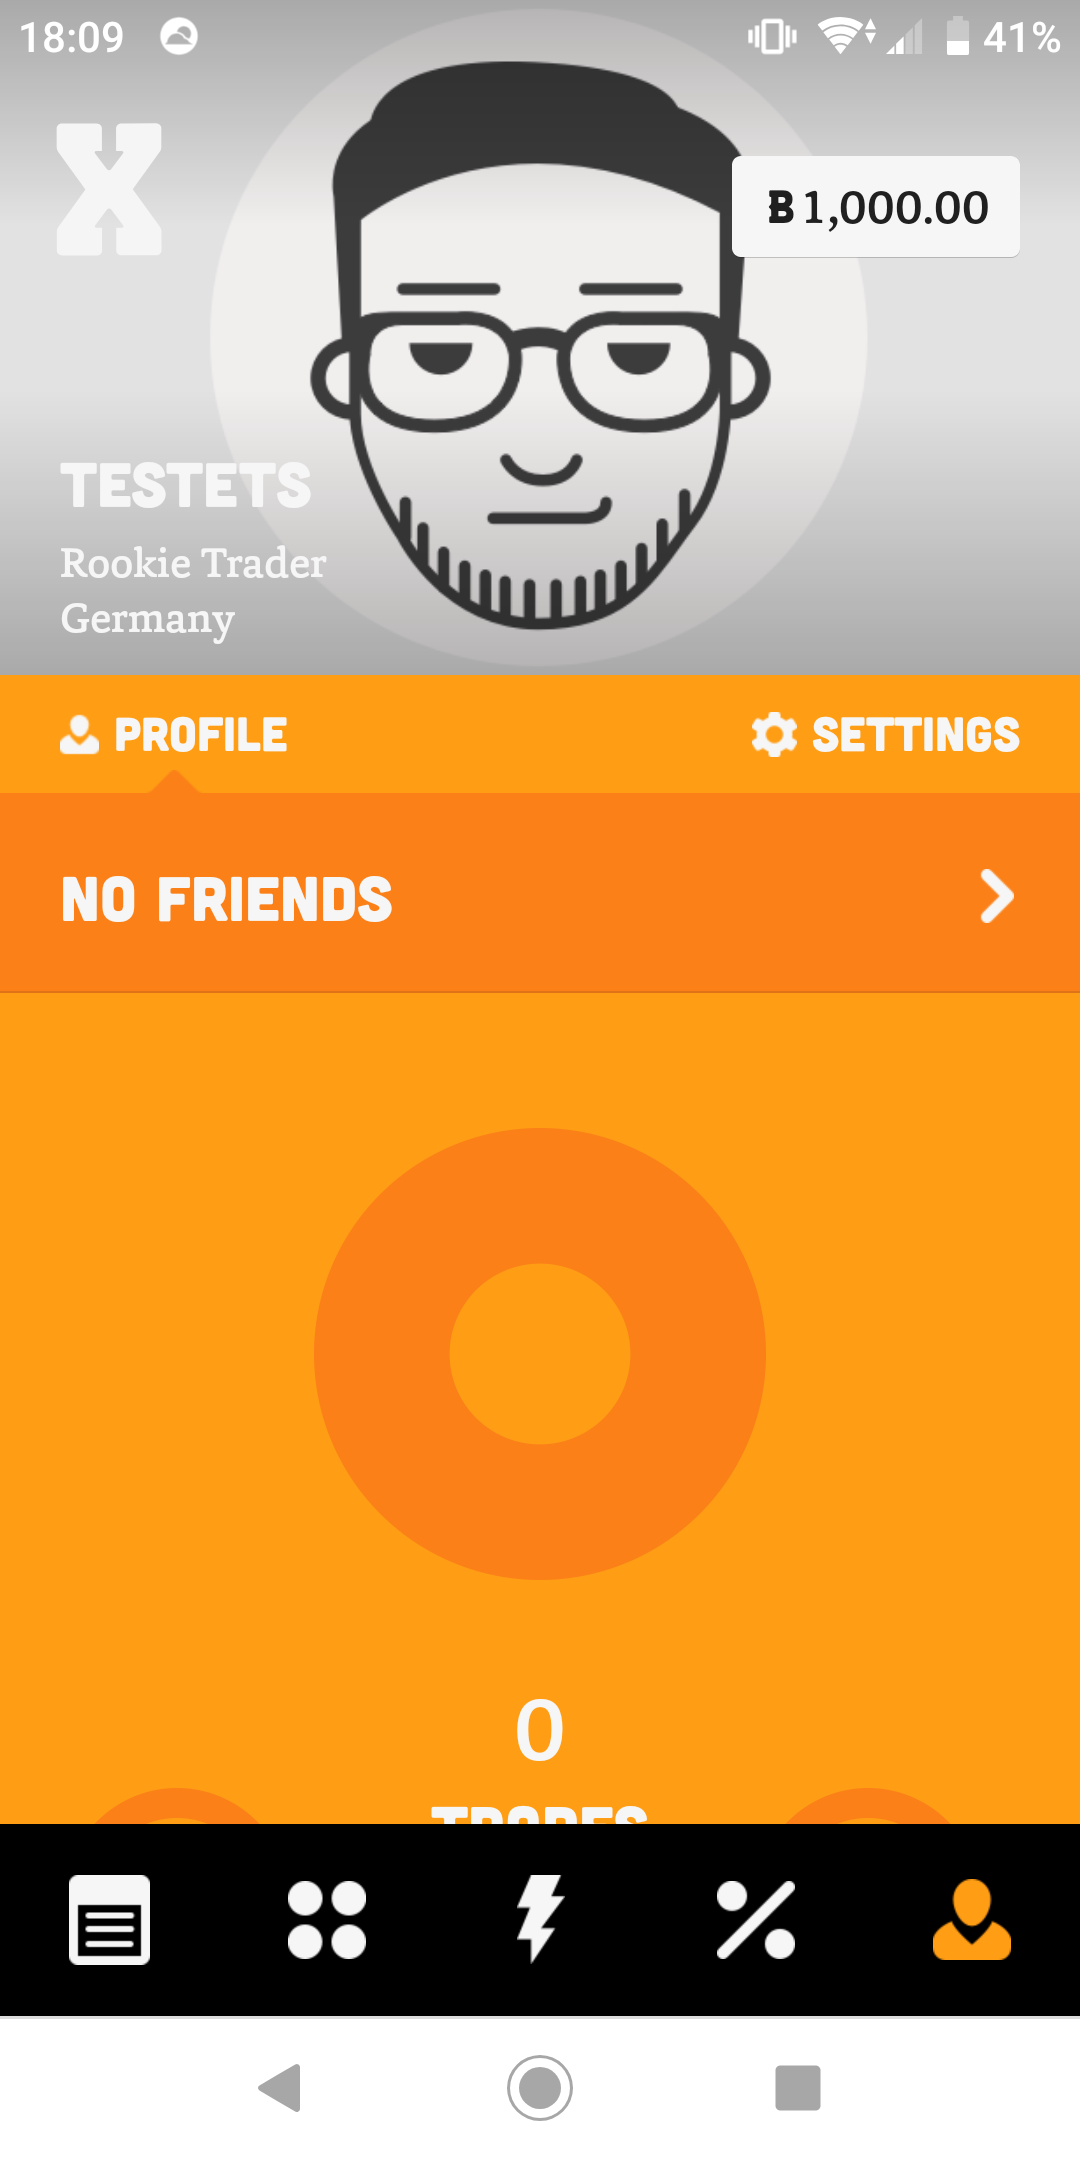 The stock trading app BUX assigns a default profile image to all new users.